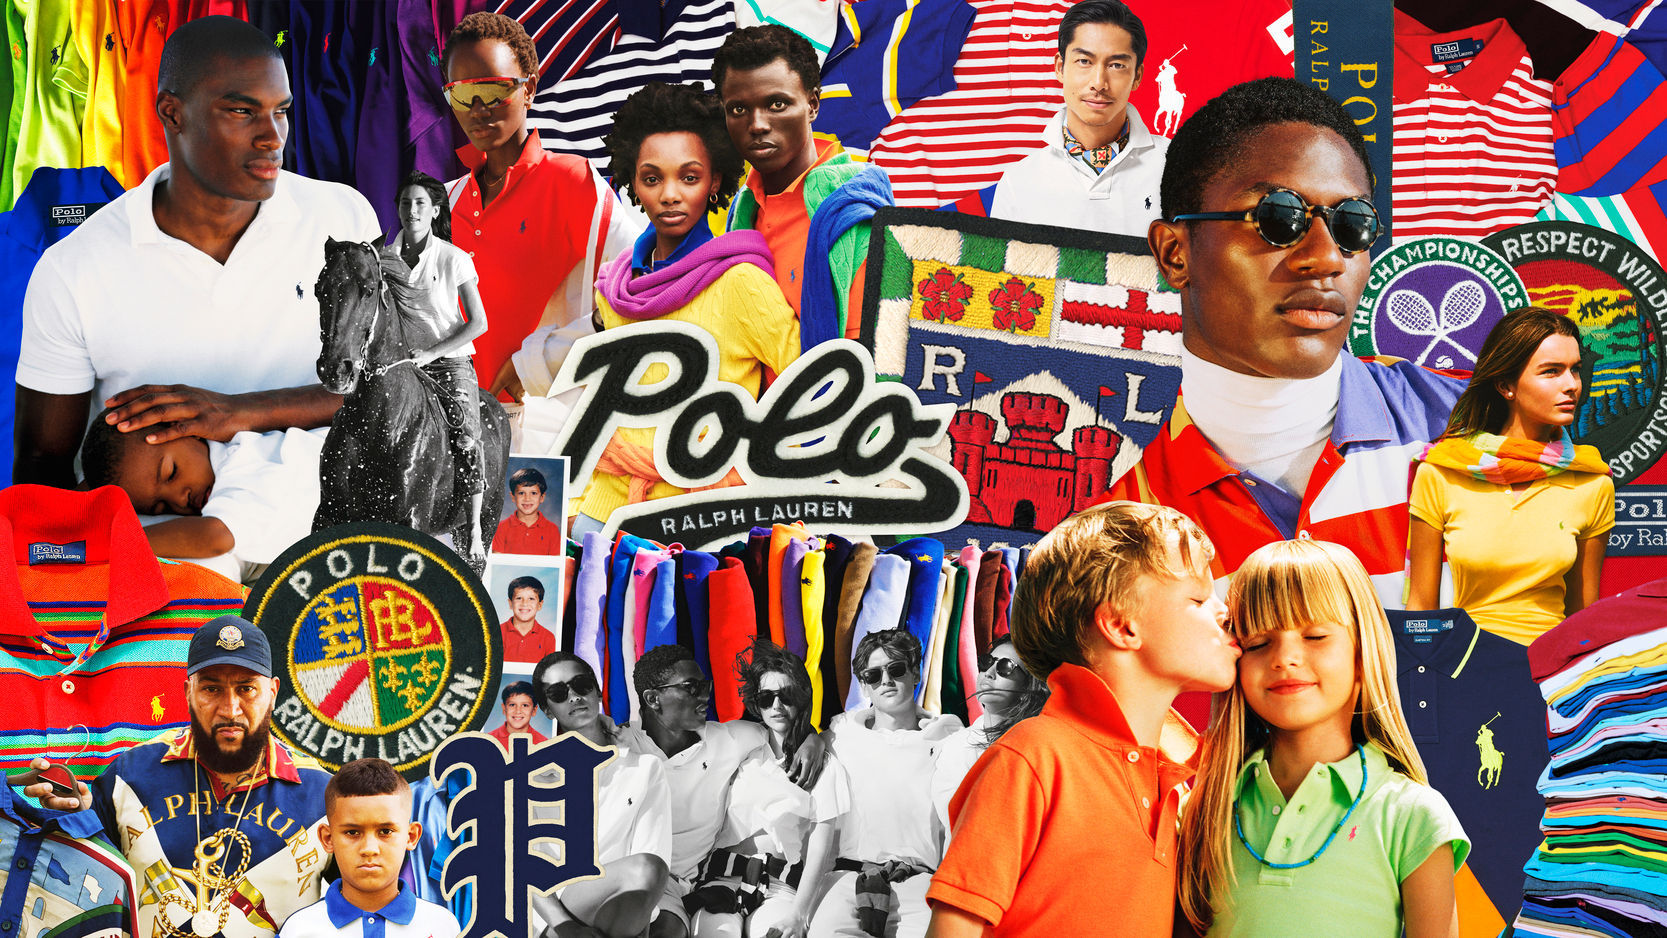 Ralph Lauren's Polo Shirt Book celebrates 50 years of the iconic garment -  The Blonde Salad